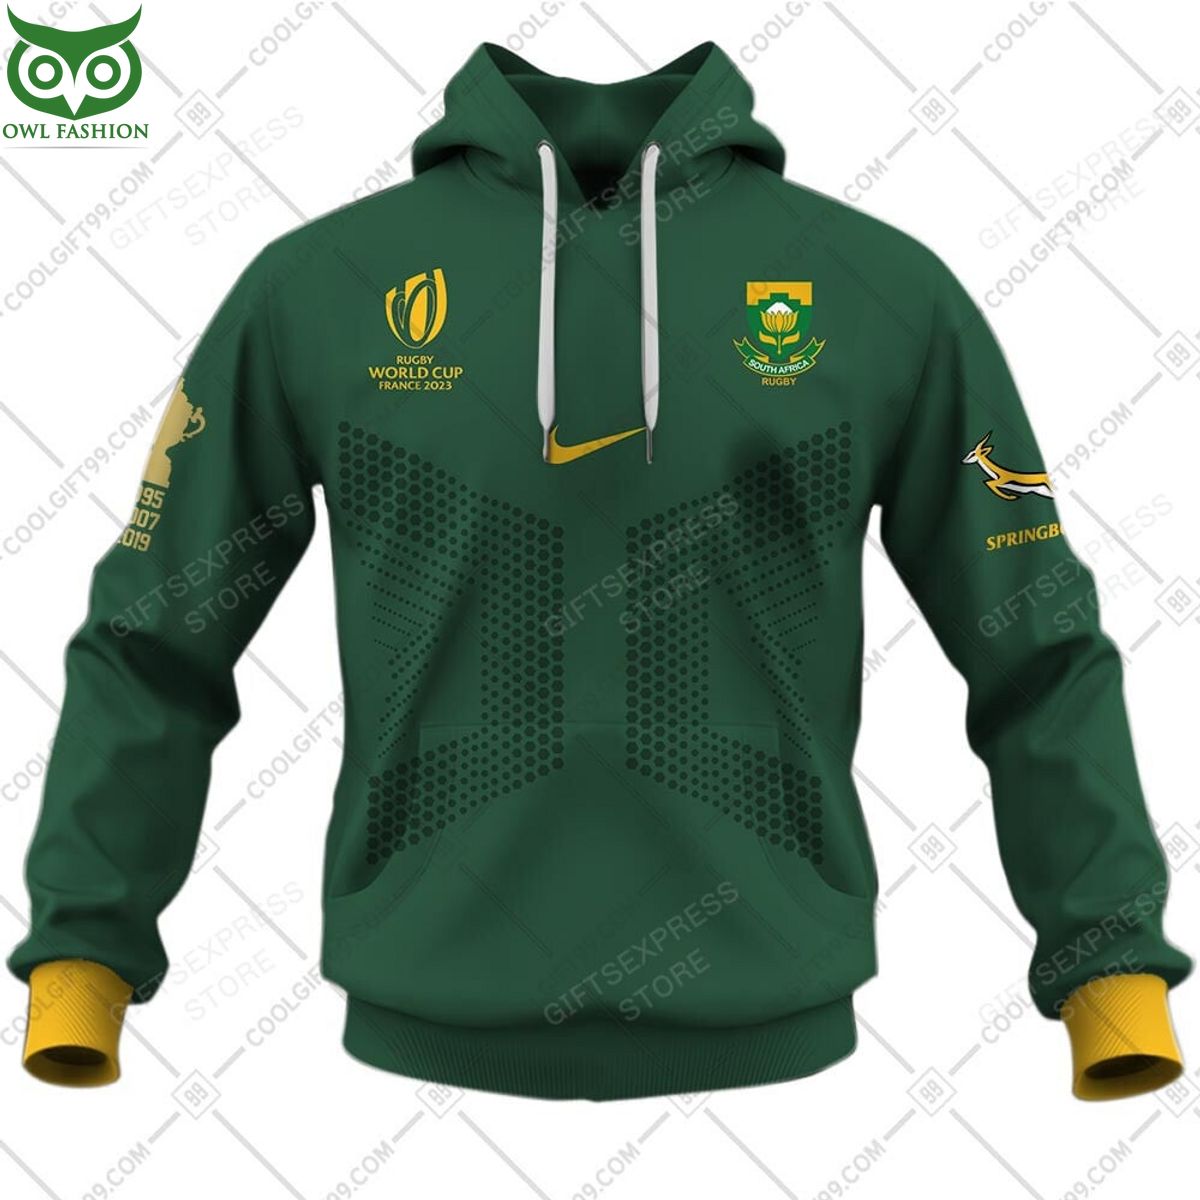 personalized rugby world cup 2023 springboks south africa 3d hoodie tshirt 6 Pg6cO.jpg